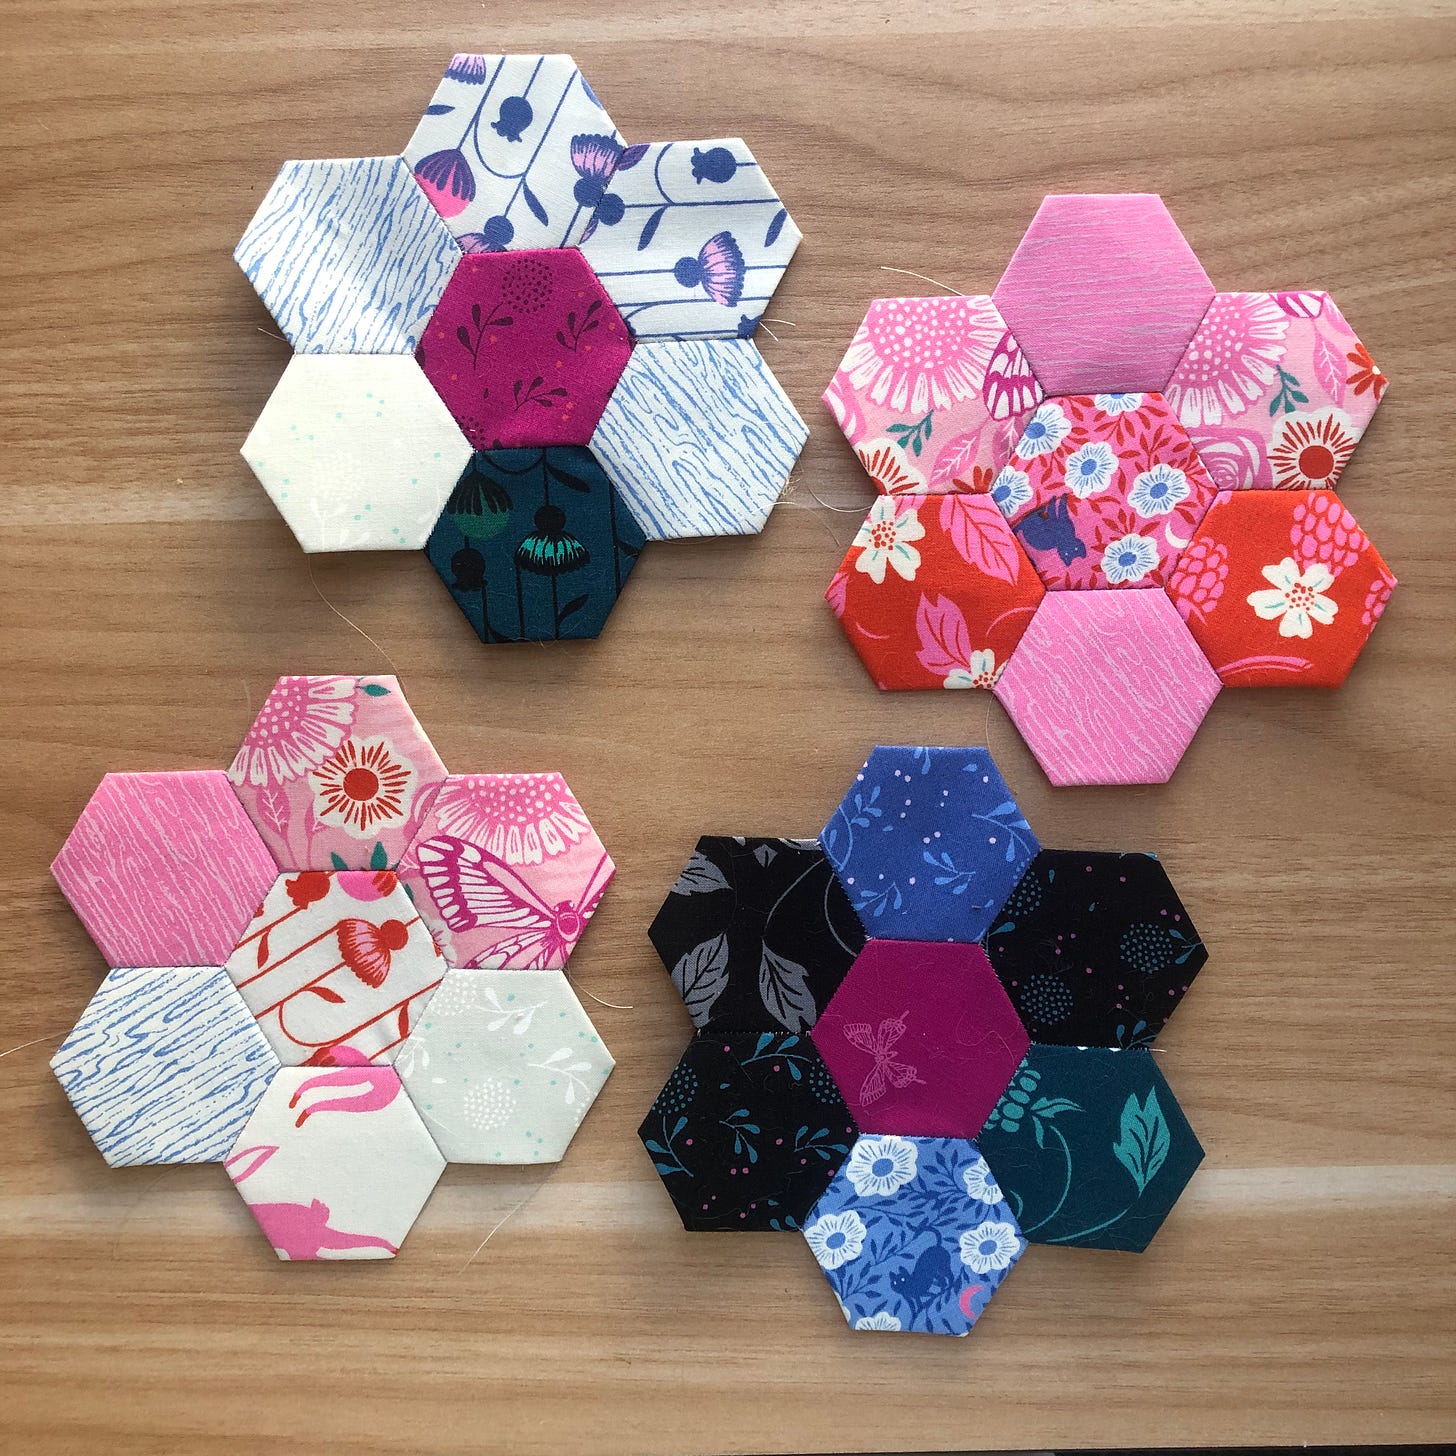 four colorfully sewn hexagonal flower groupings against a wooden background